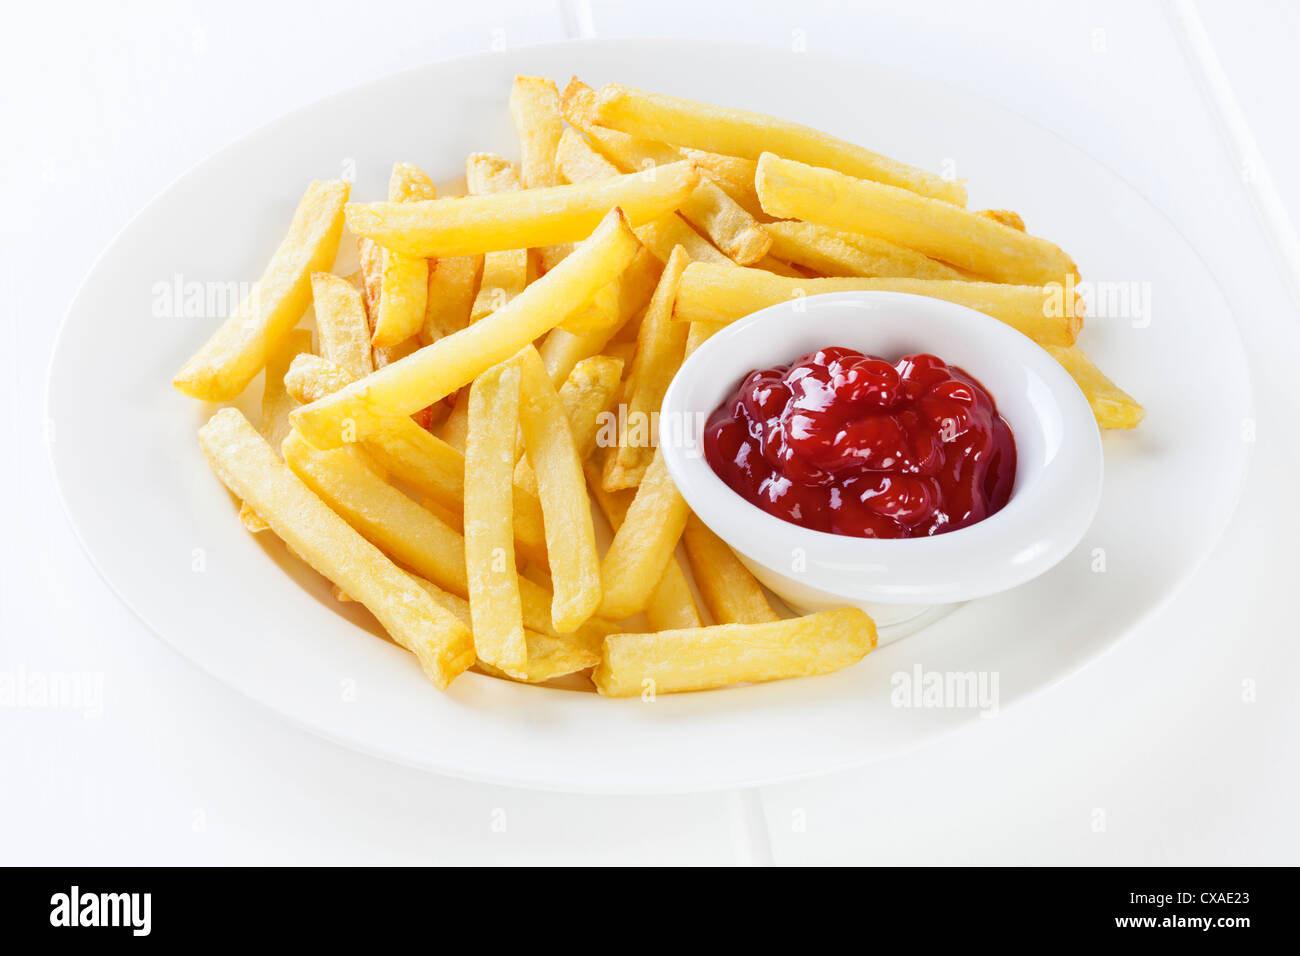 A plate of French Fries with tomato ketchup in a little bowl. Stock Photo